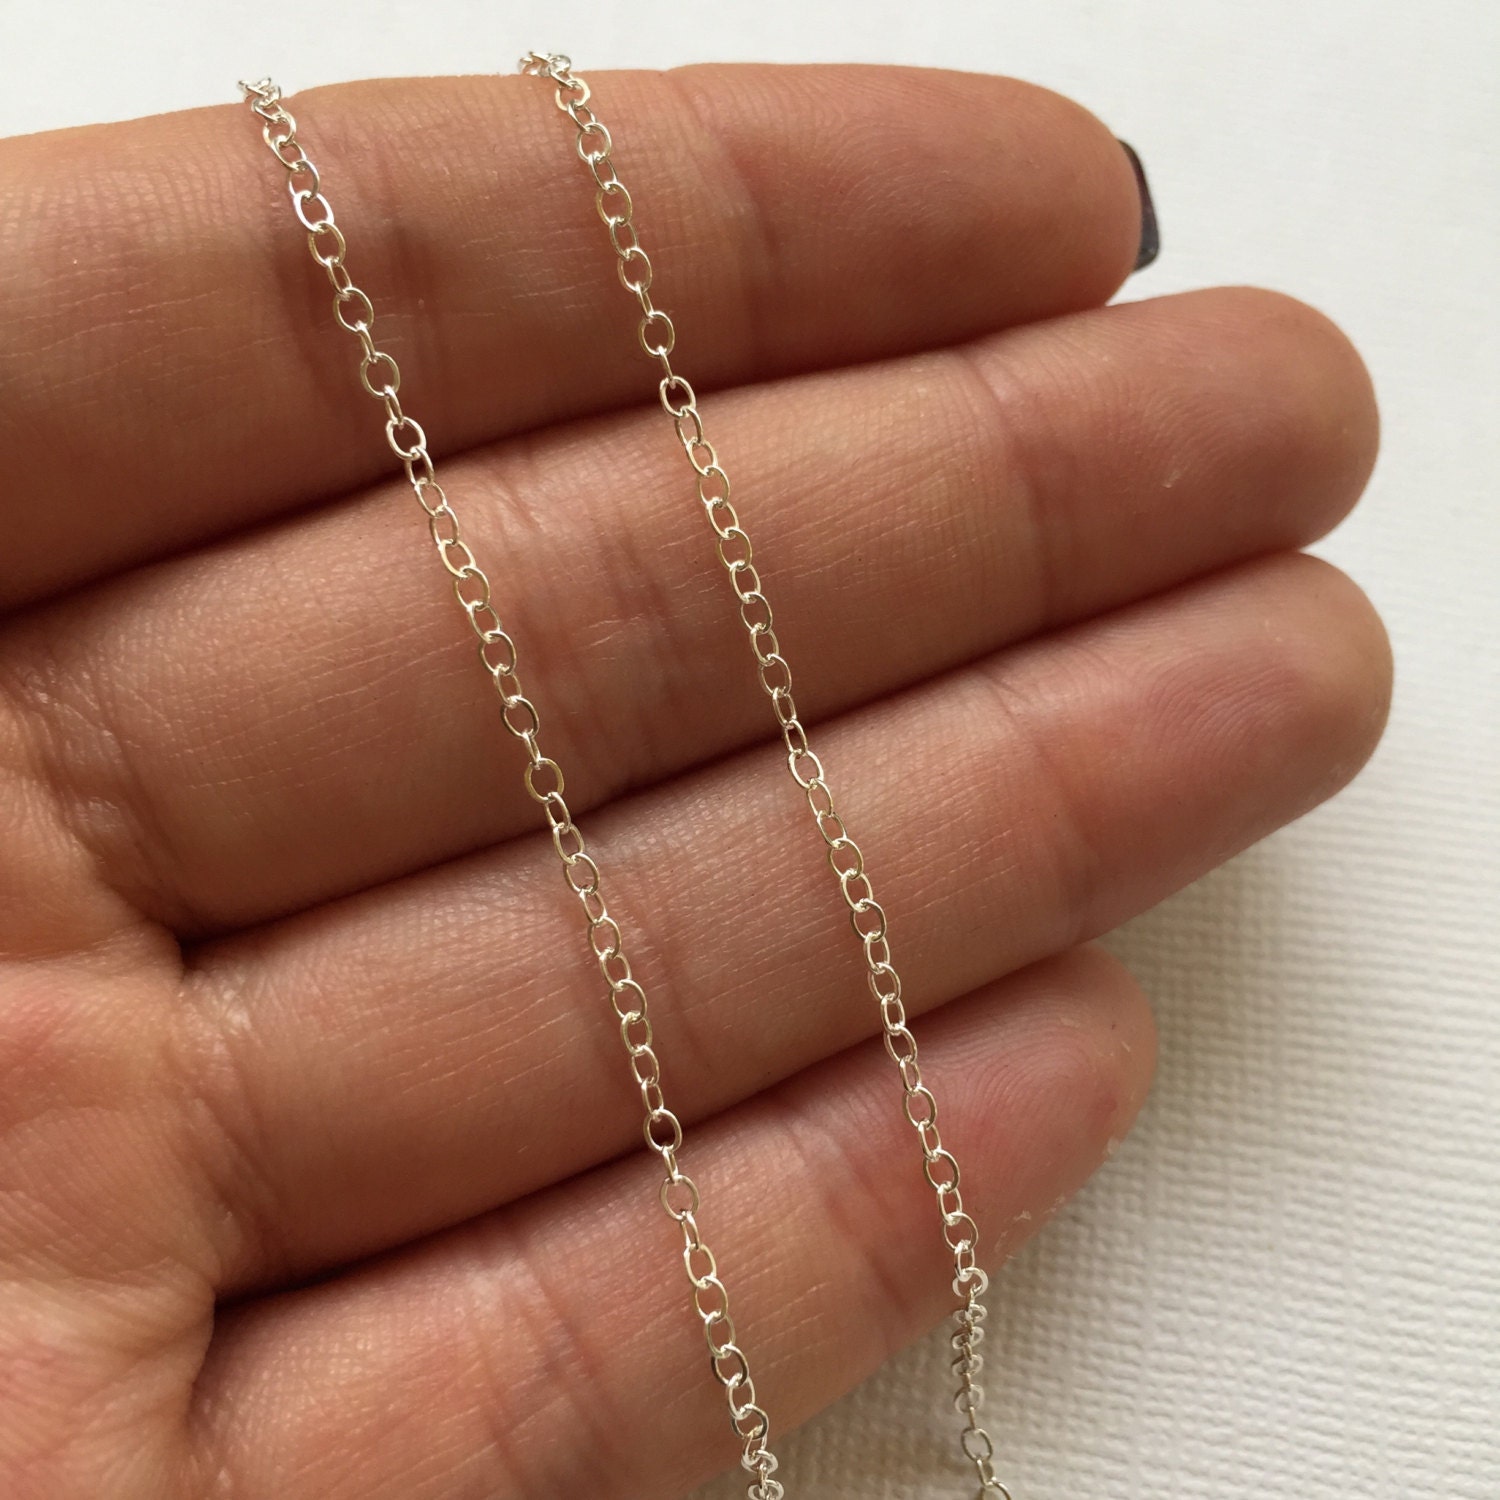 1 to 100 Feet, Sterling Silver Flat Cable Chain or Round Cable Chain, Solid  925 SS Chain Bulk, 1.5 Mm Oval Link Necklace Chain S88 S68 D66 